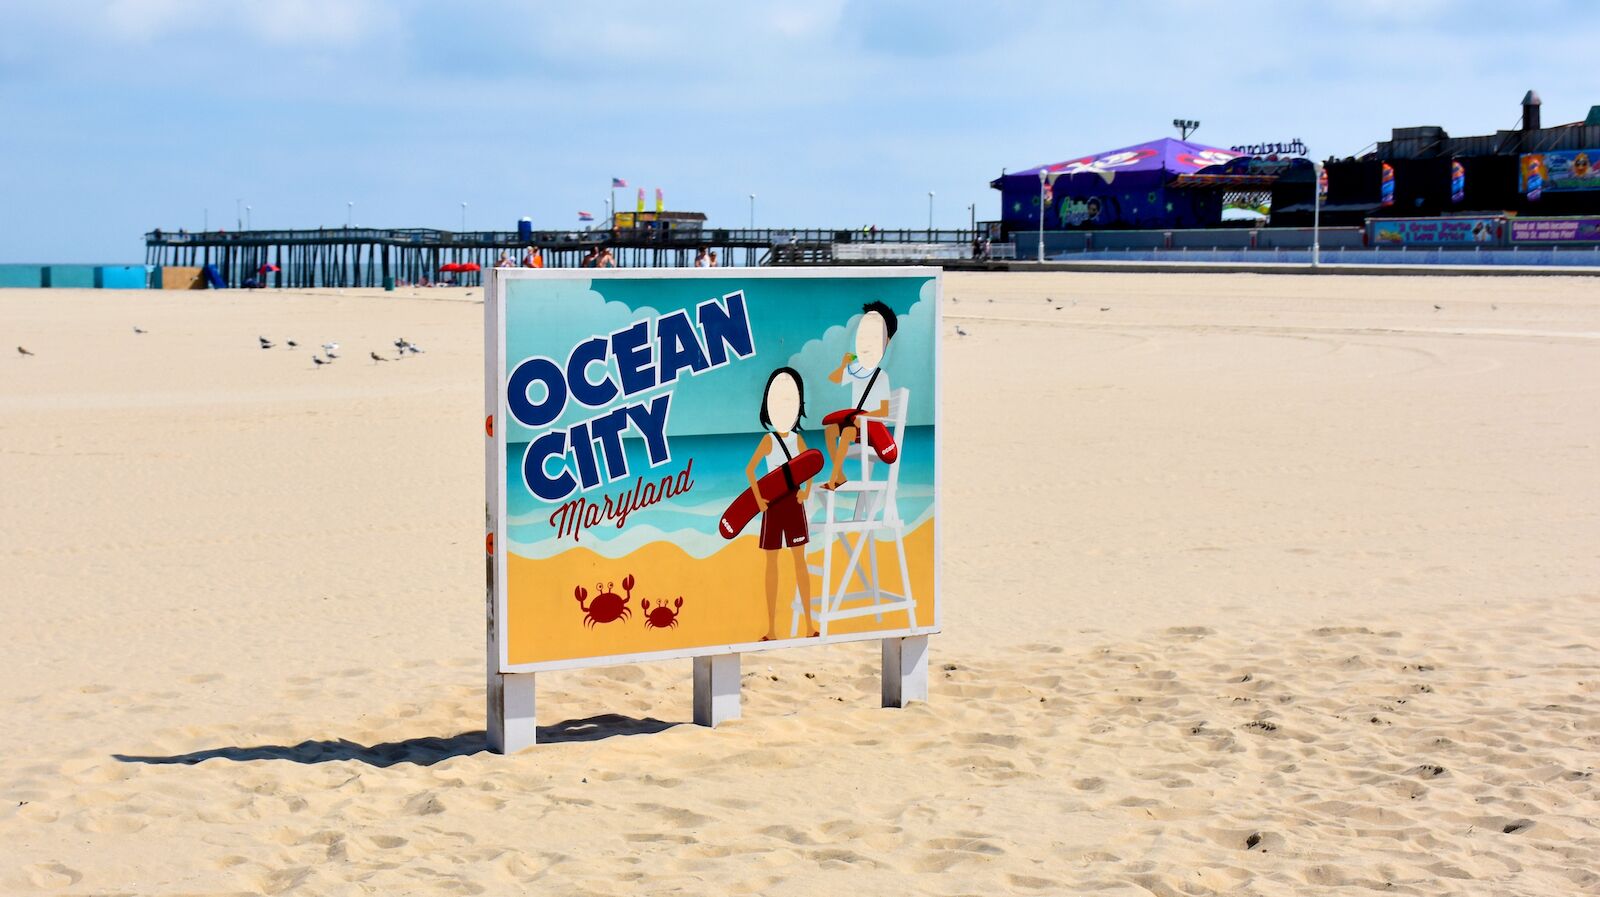 things to do in ocean city maryland - vintage beach sign